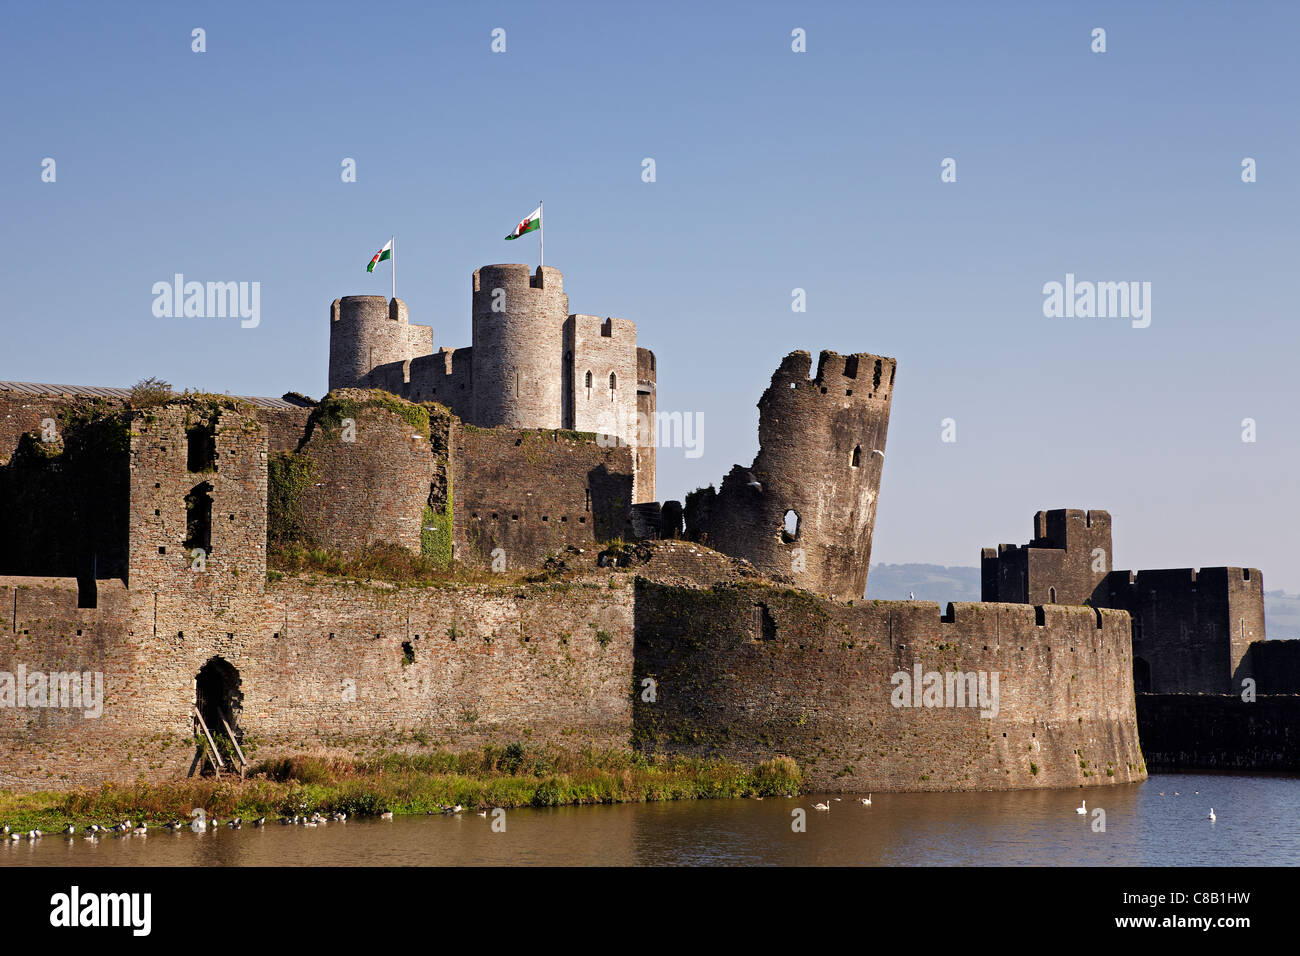 Château de Caerphilly, Caerphilly, South Wales, UK Banque D'Images